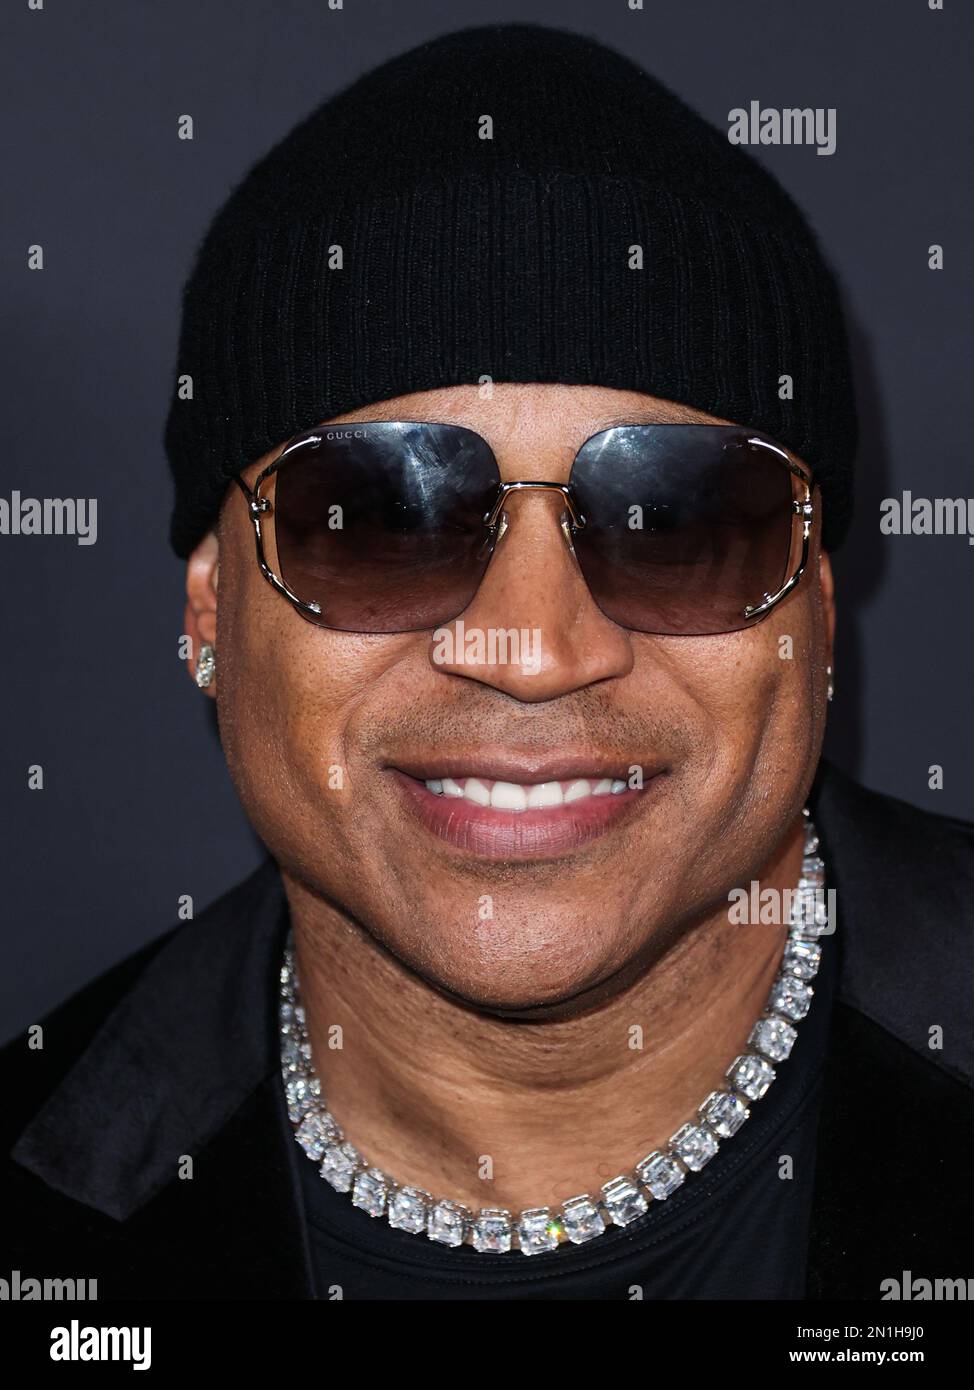 LOS ANGELES, CALIFORNIA, USA - FEBRUARY 05: American rapper, songwriter, record producer and actor LL Cool J arrives at the Universal Music Group 2023 65th GRAMMY Awards After Party held at Milk Studios Los Angeles on February 5, 2023 in Los Angeles, California, United States. (Photo by Xavier Collin/Image Press Agency) Stock Photo